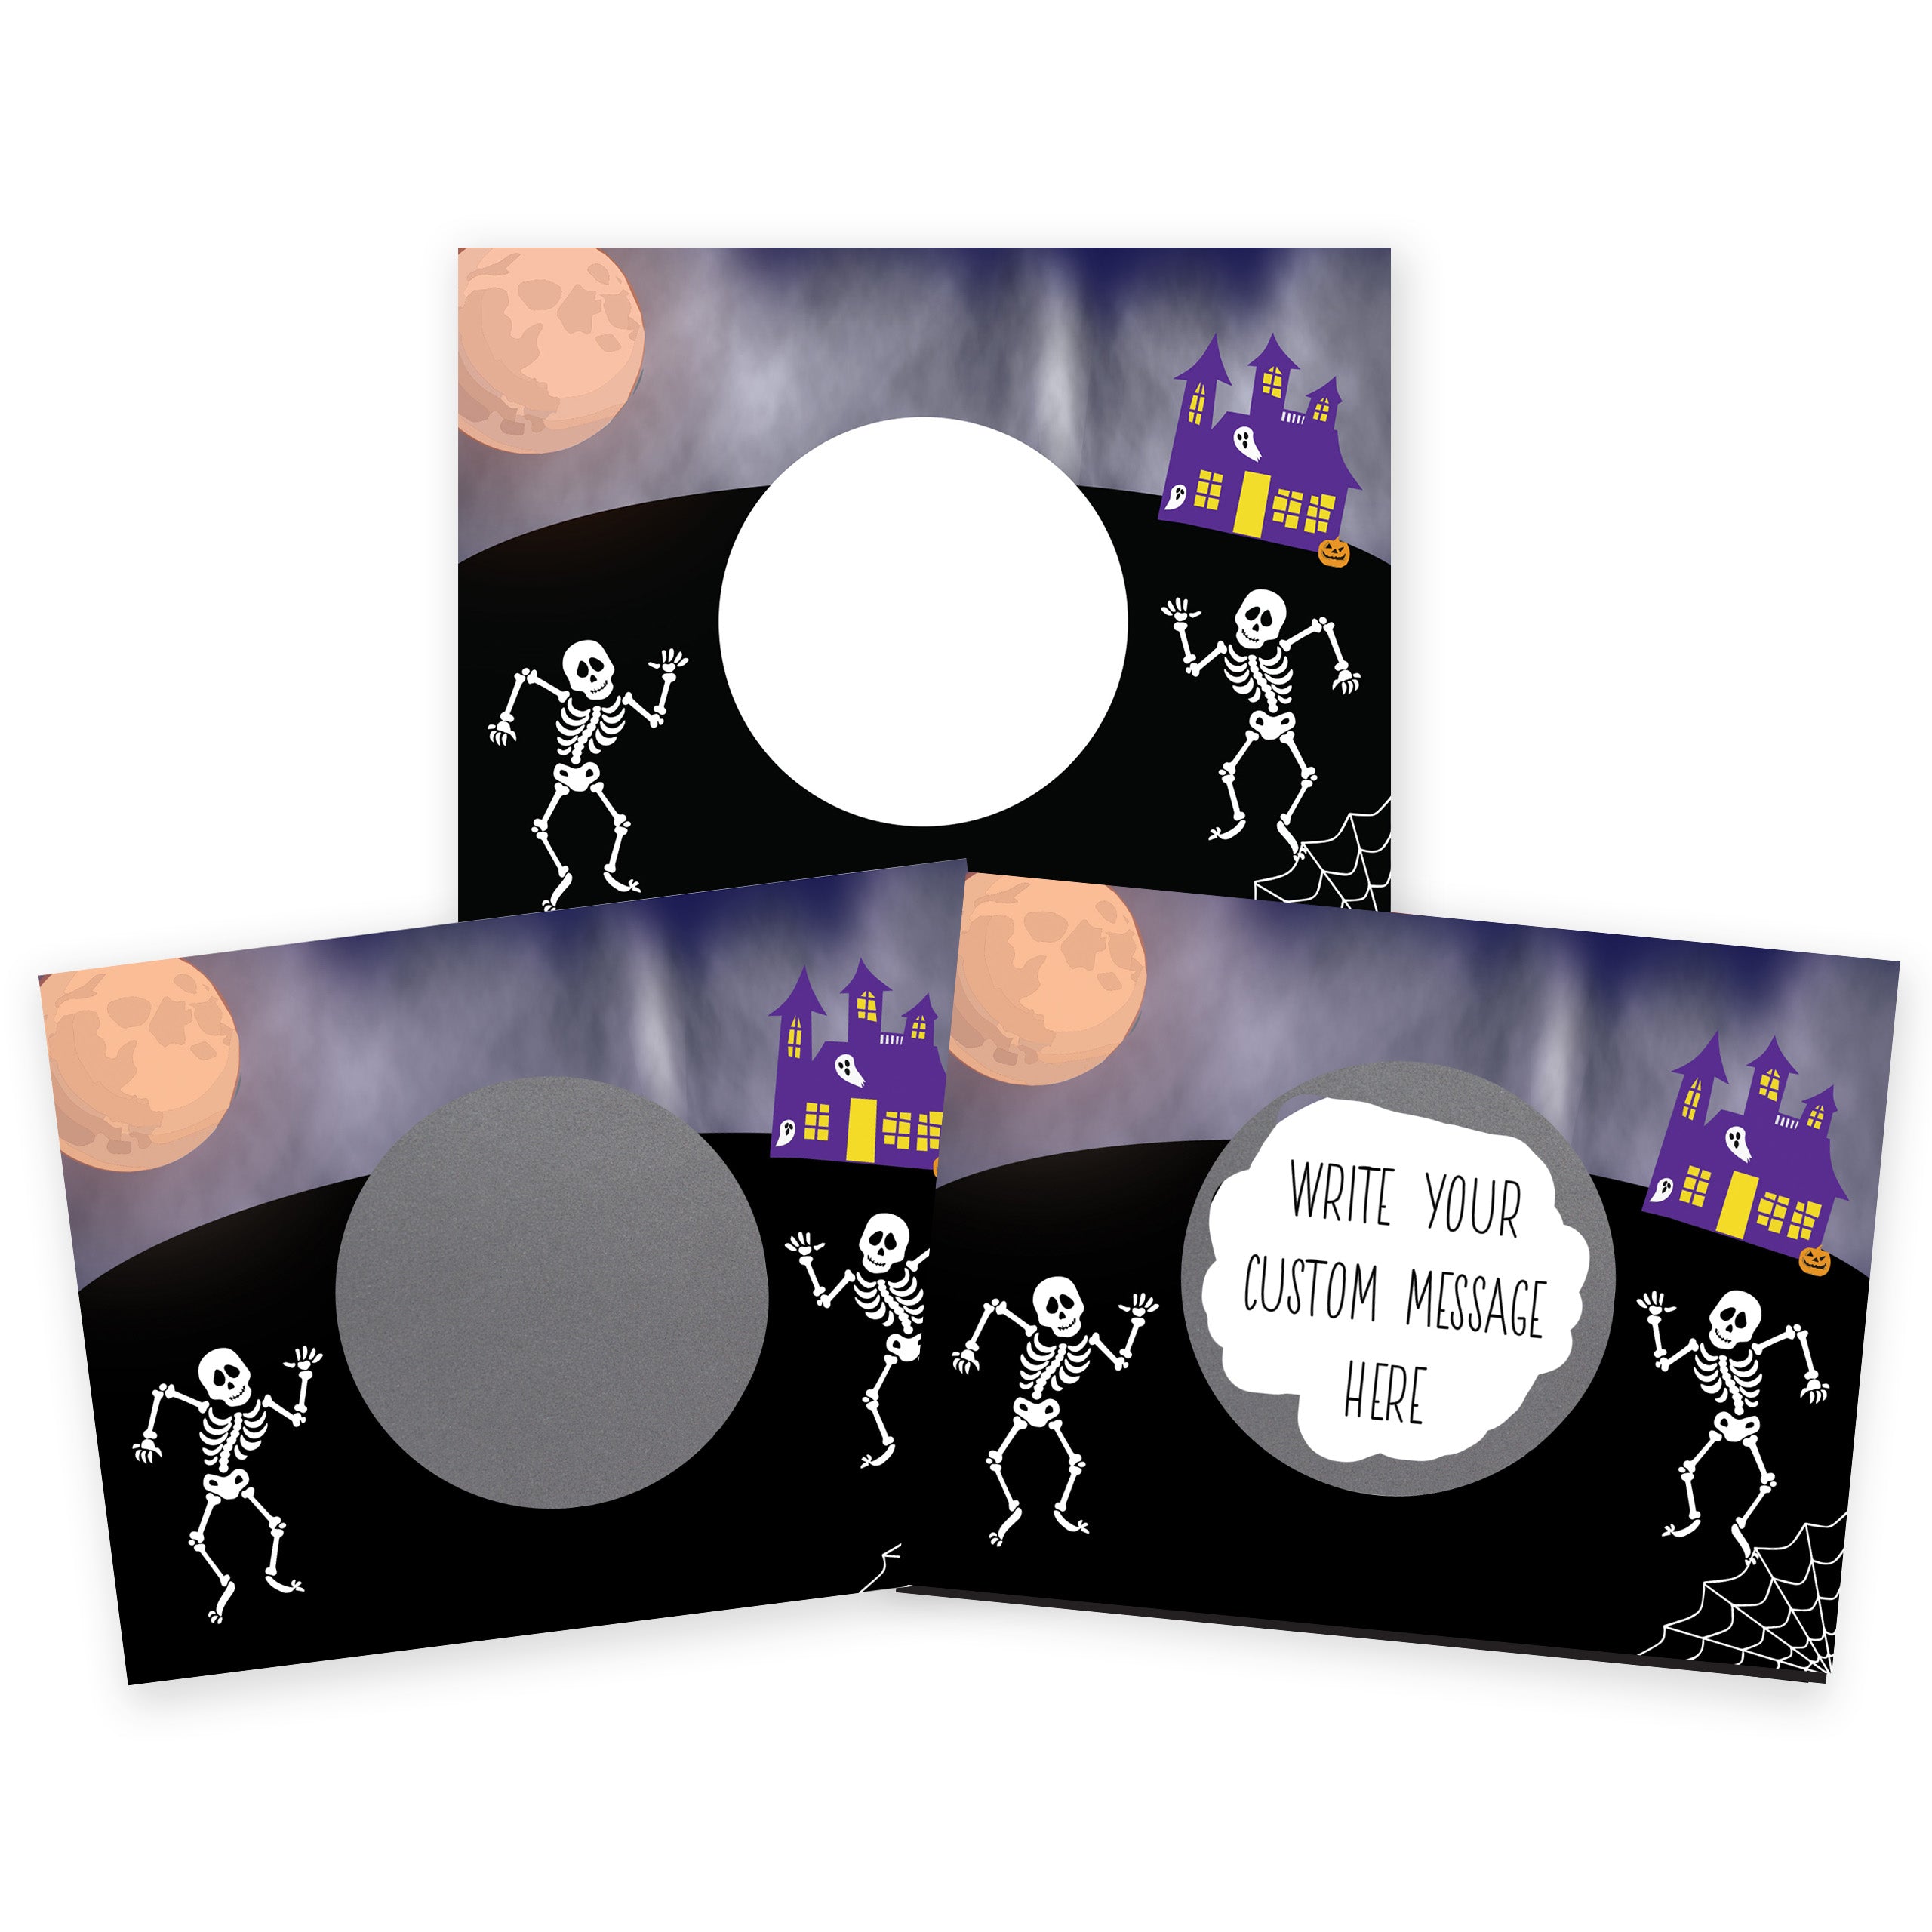 DIY Halloween Spooky Skeleton Make Your Own Scratch Offs - 20 Cards and 20 Scratch Off Stickers